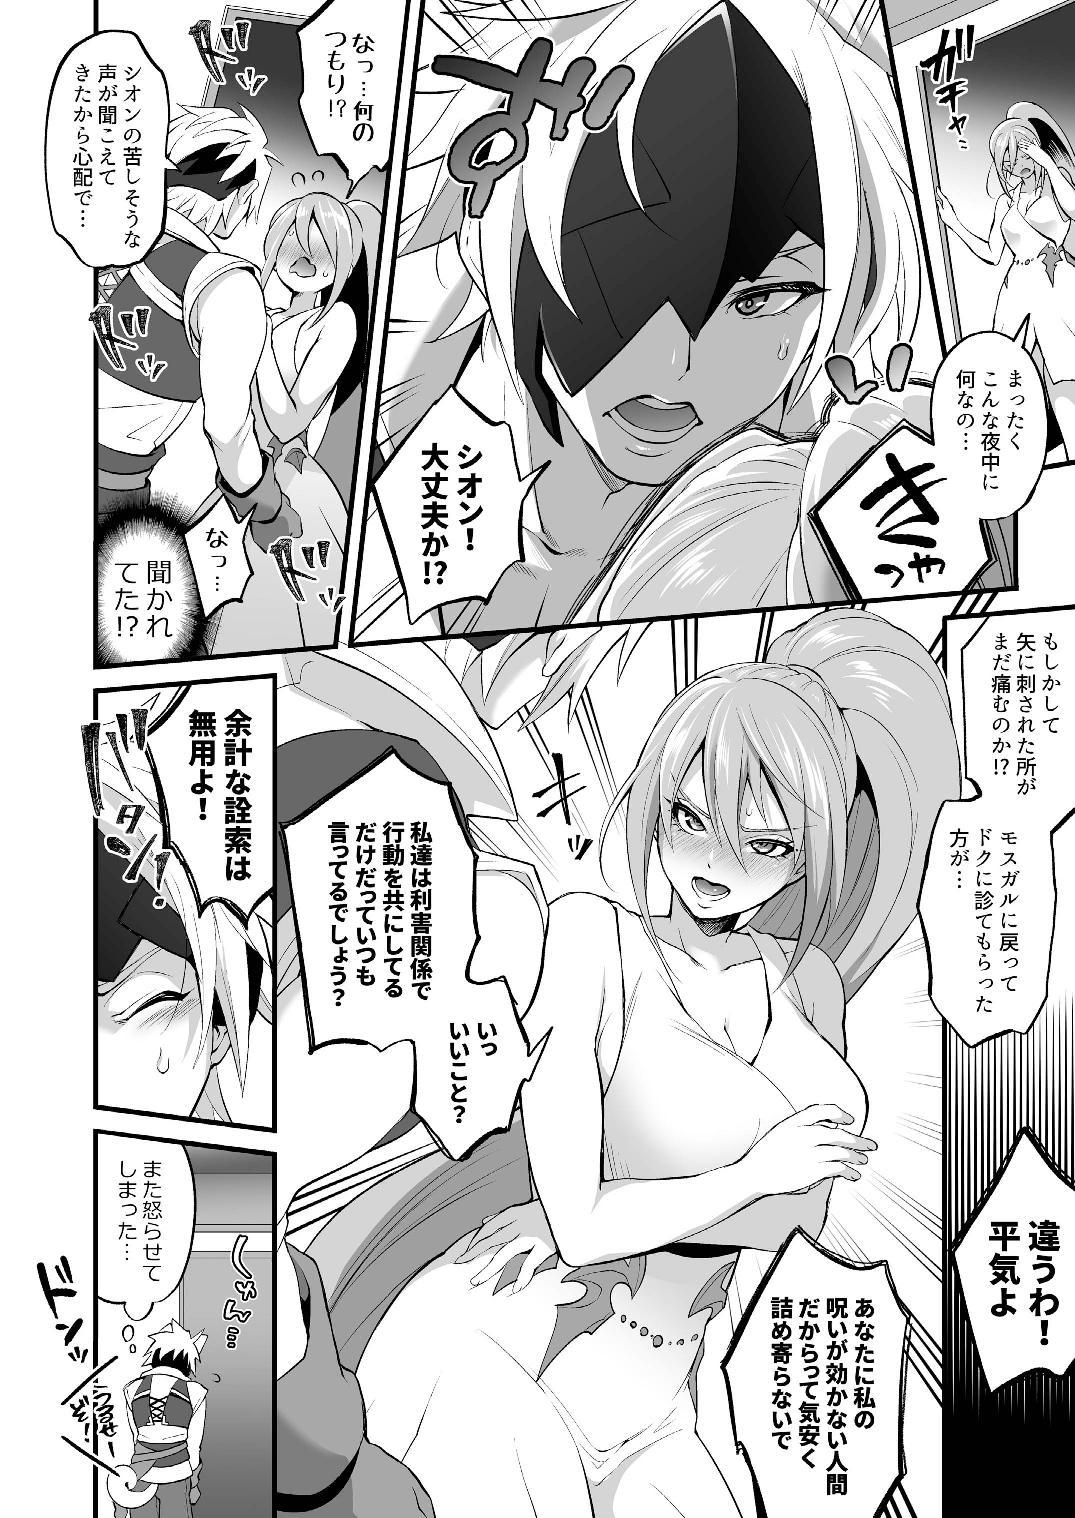 Stepson 私に詰め寄ると〇〇〇がイくわよ…! - Tales of arise Bdsm - Page 8